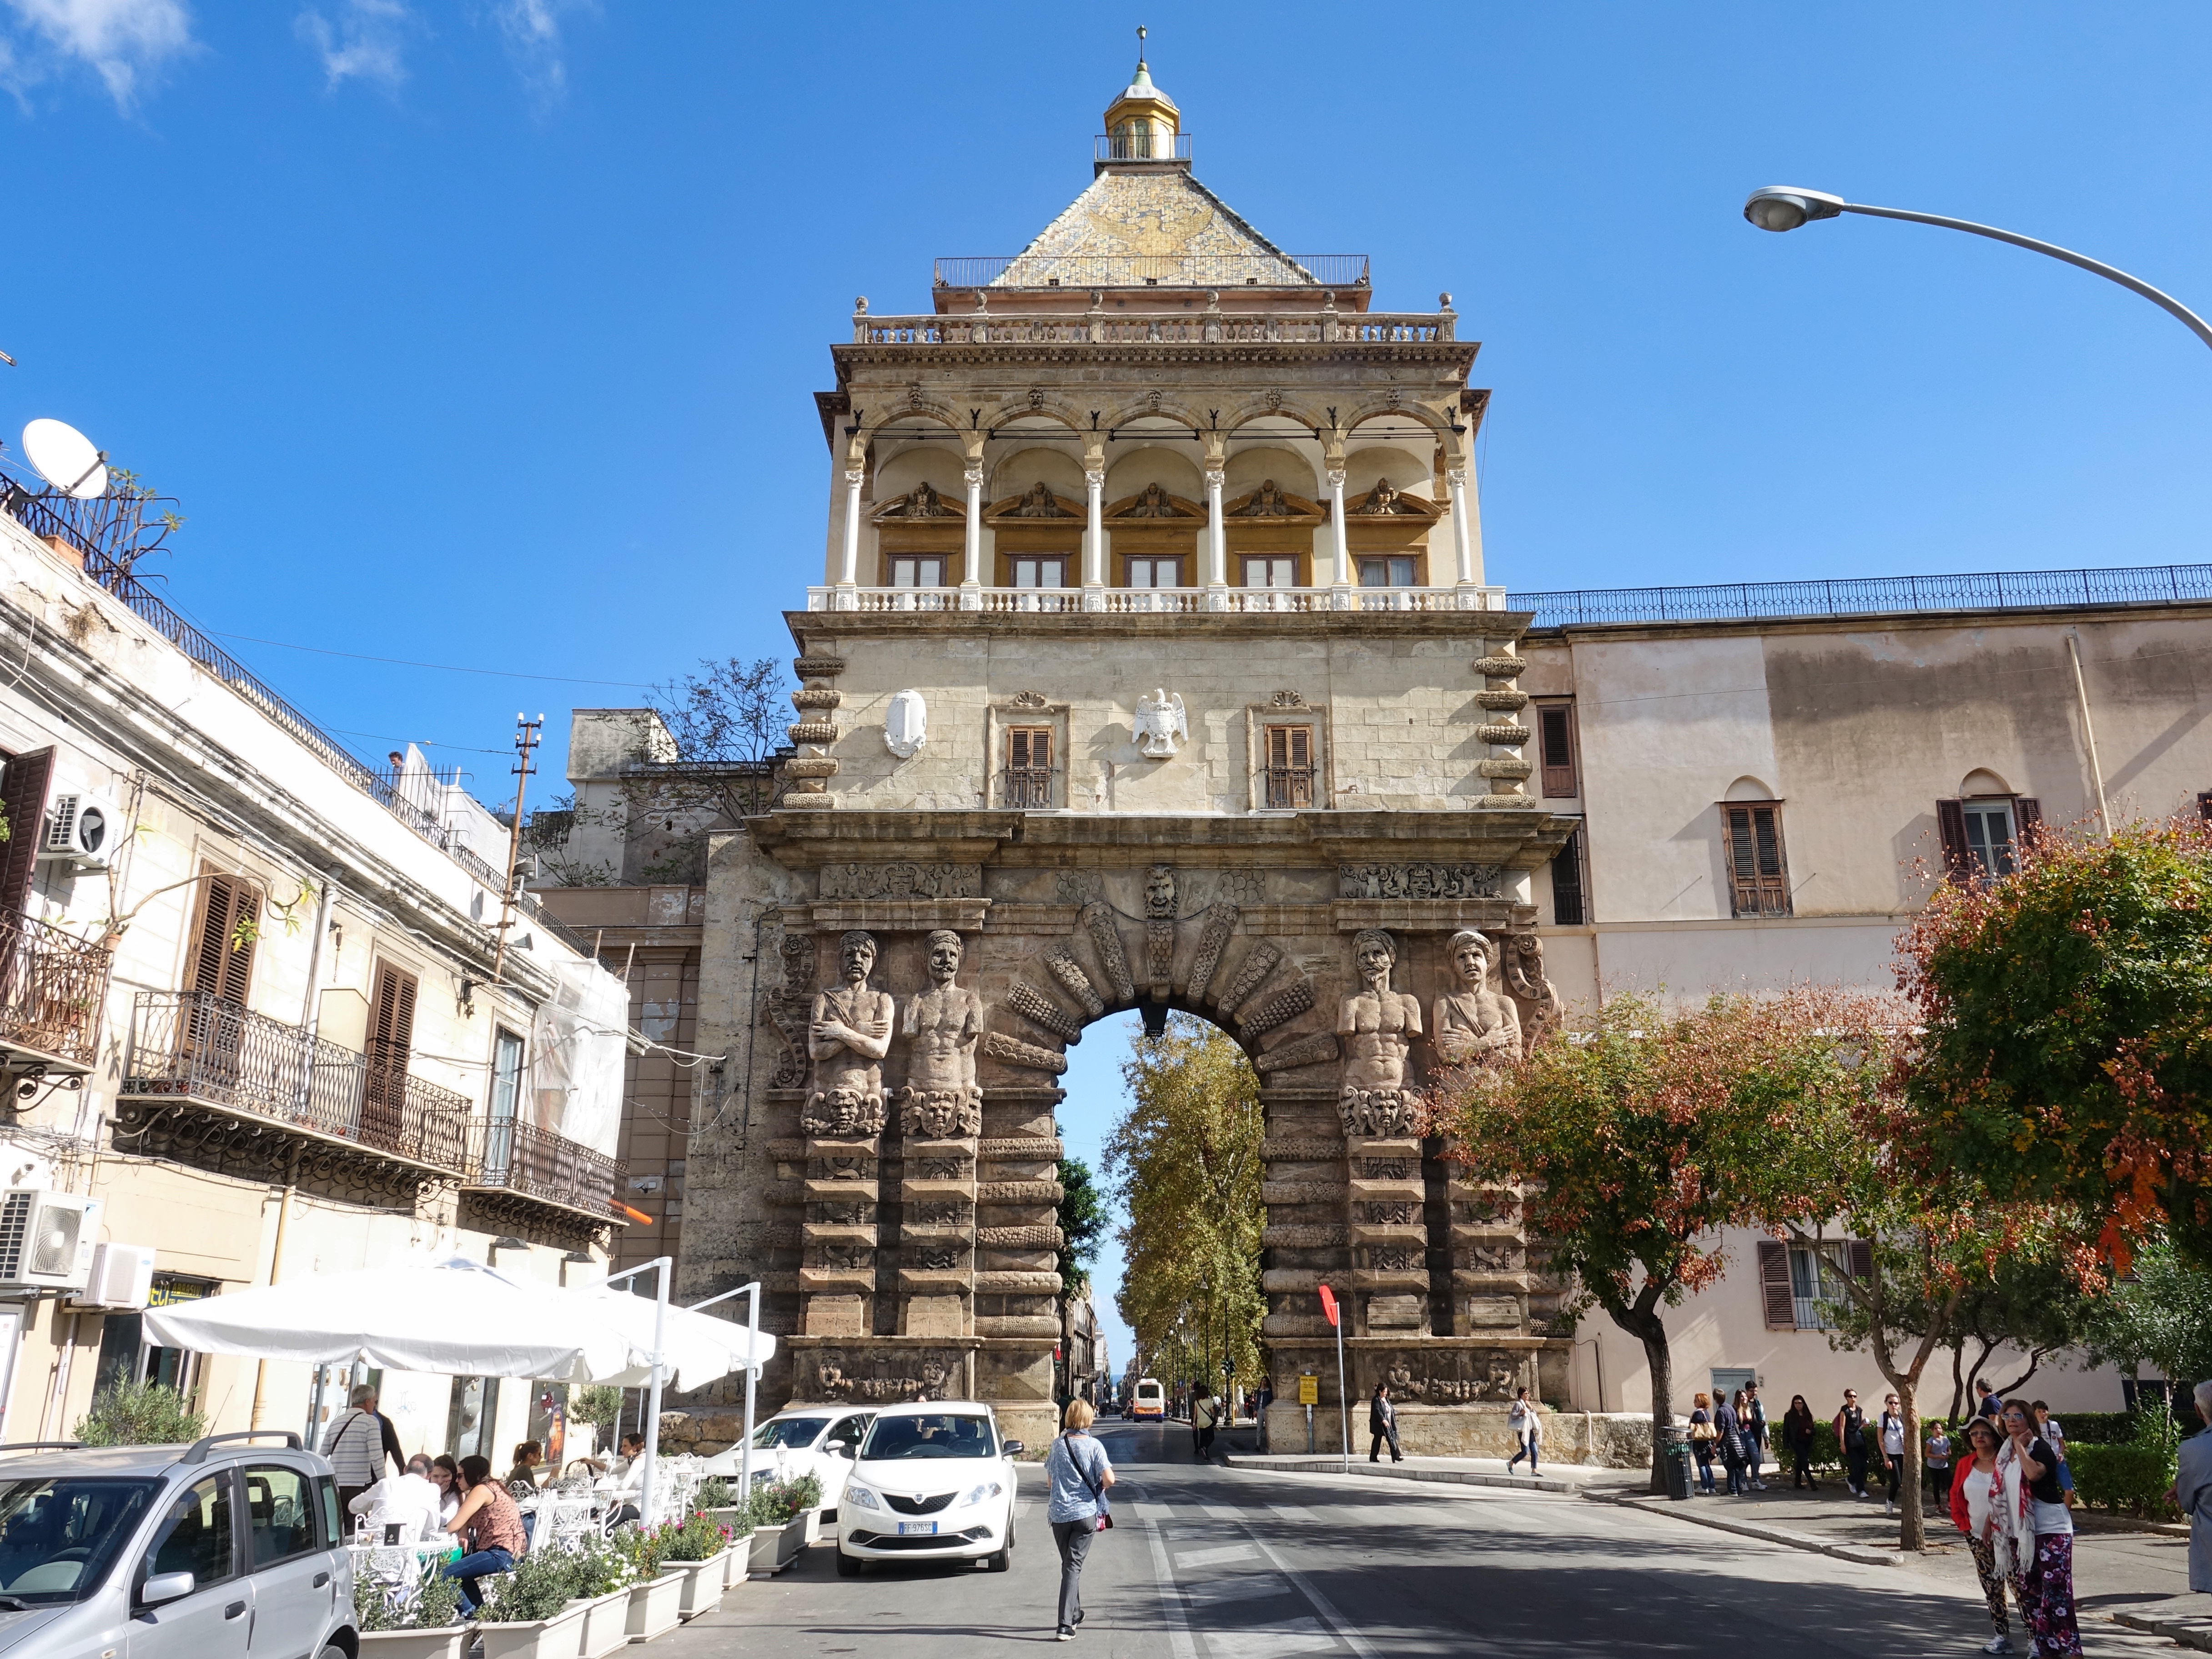 Beautiful gate into old town Palermo; some Ottoman and Arabic influences seen here